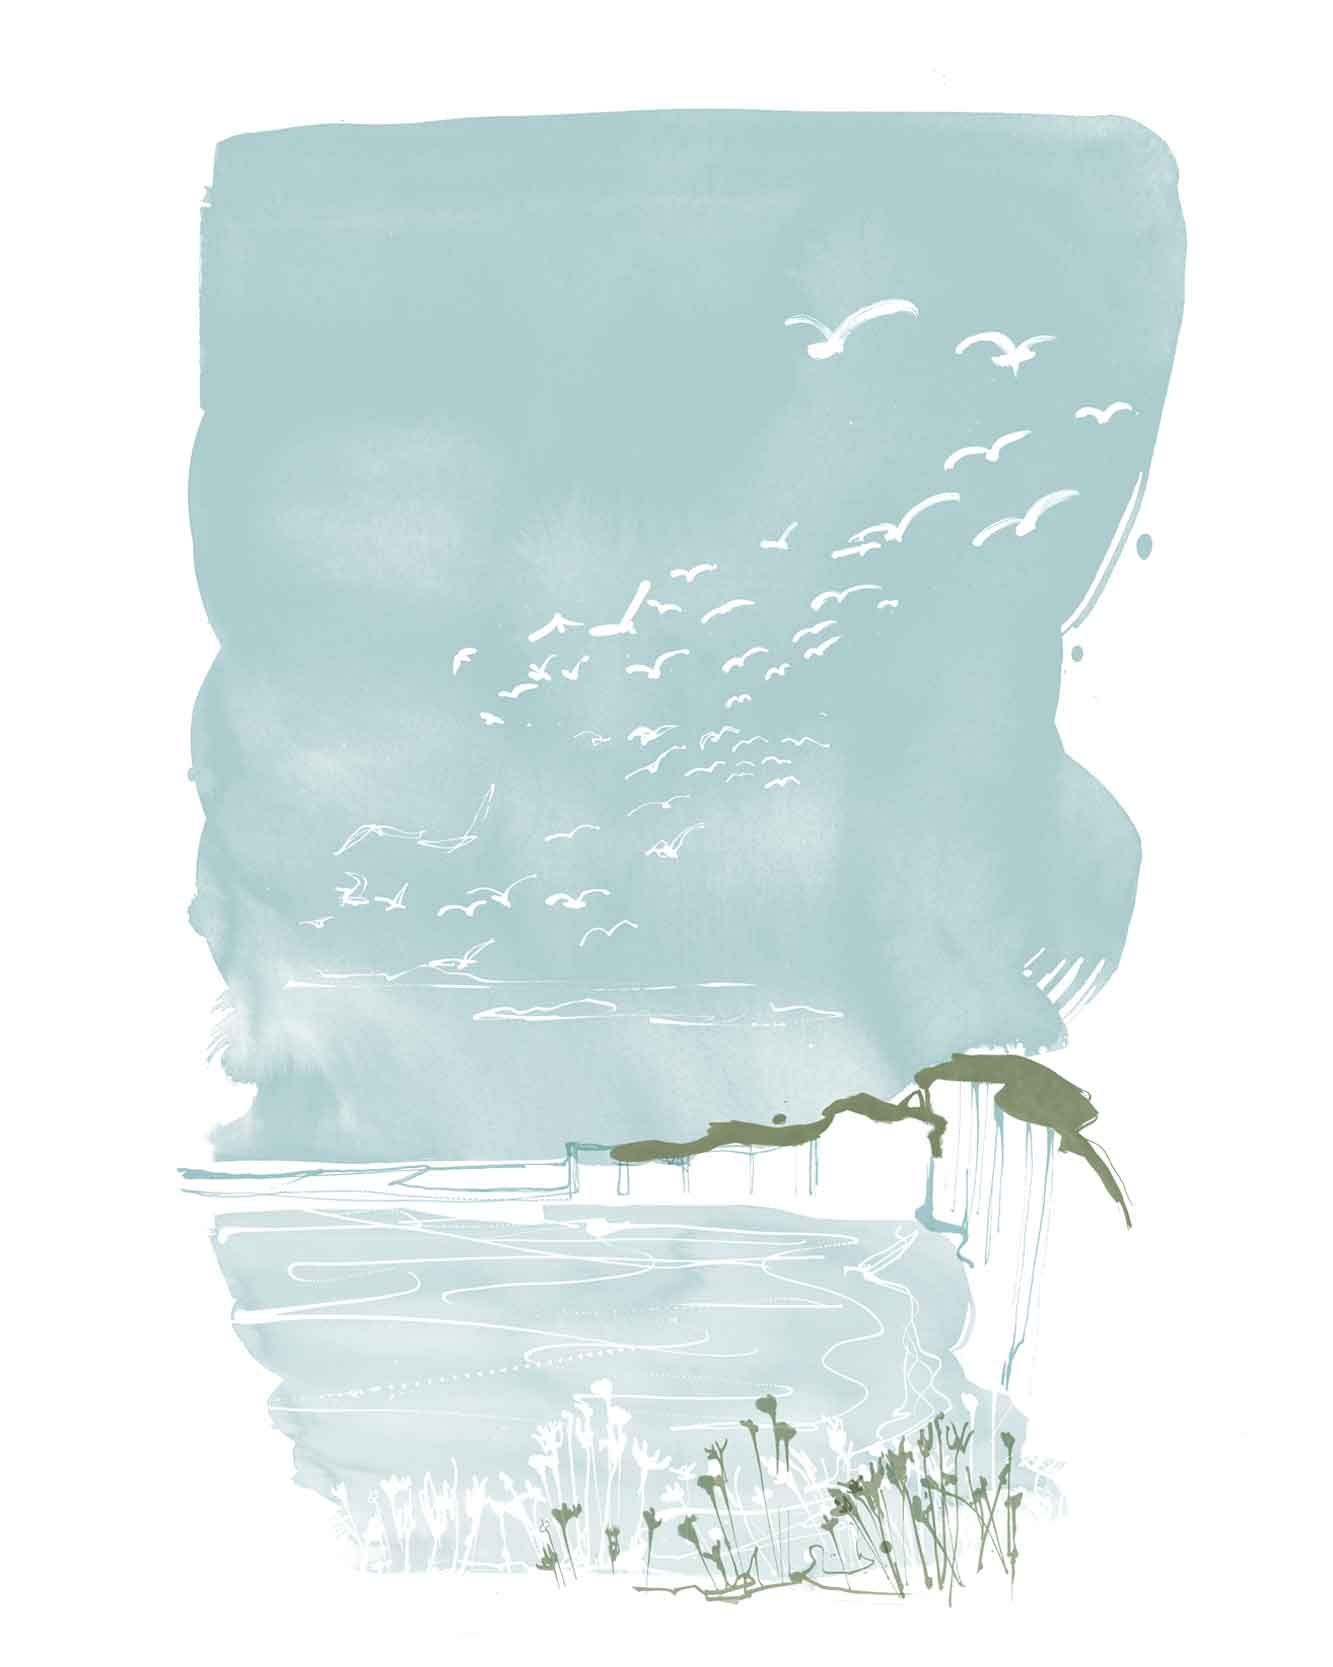 Endless Summer Coastal Walkway Giclée Print. Part of an ongoing personal project inspired by the coast. Art for the home. Hand printed.